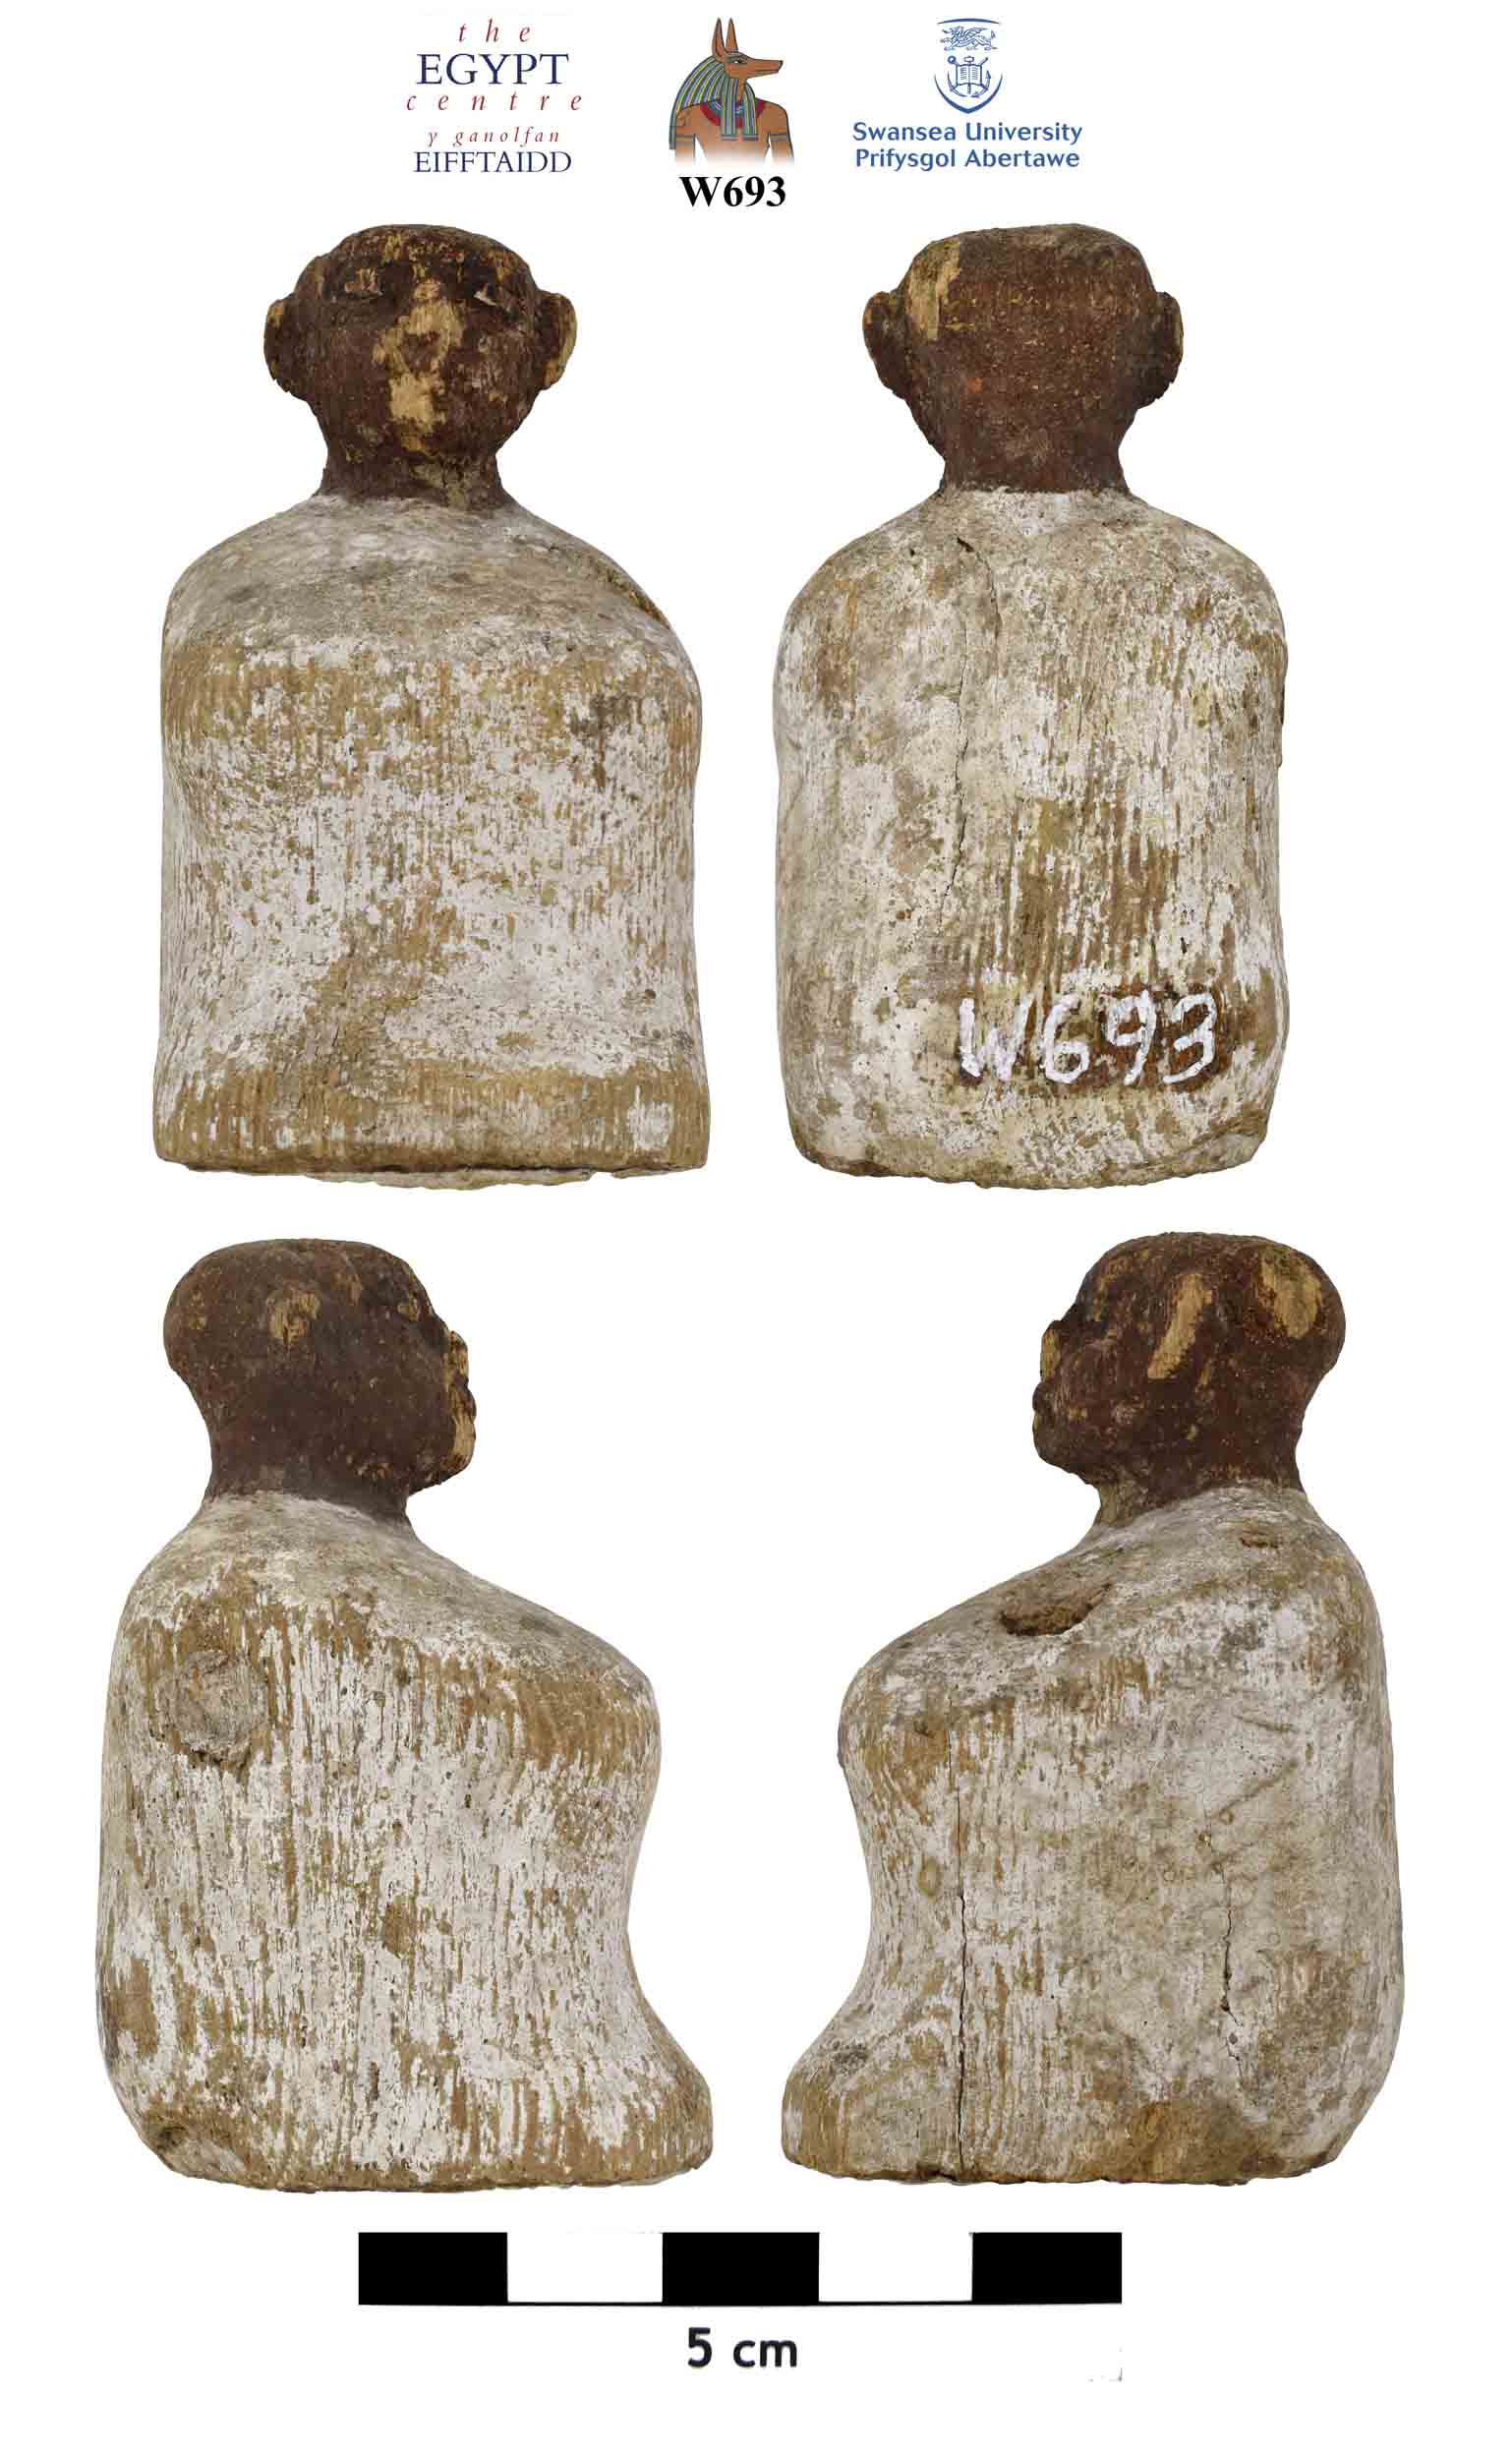 Image for: Wooden funerary figure wrapped in a cloak